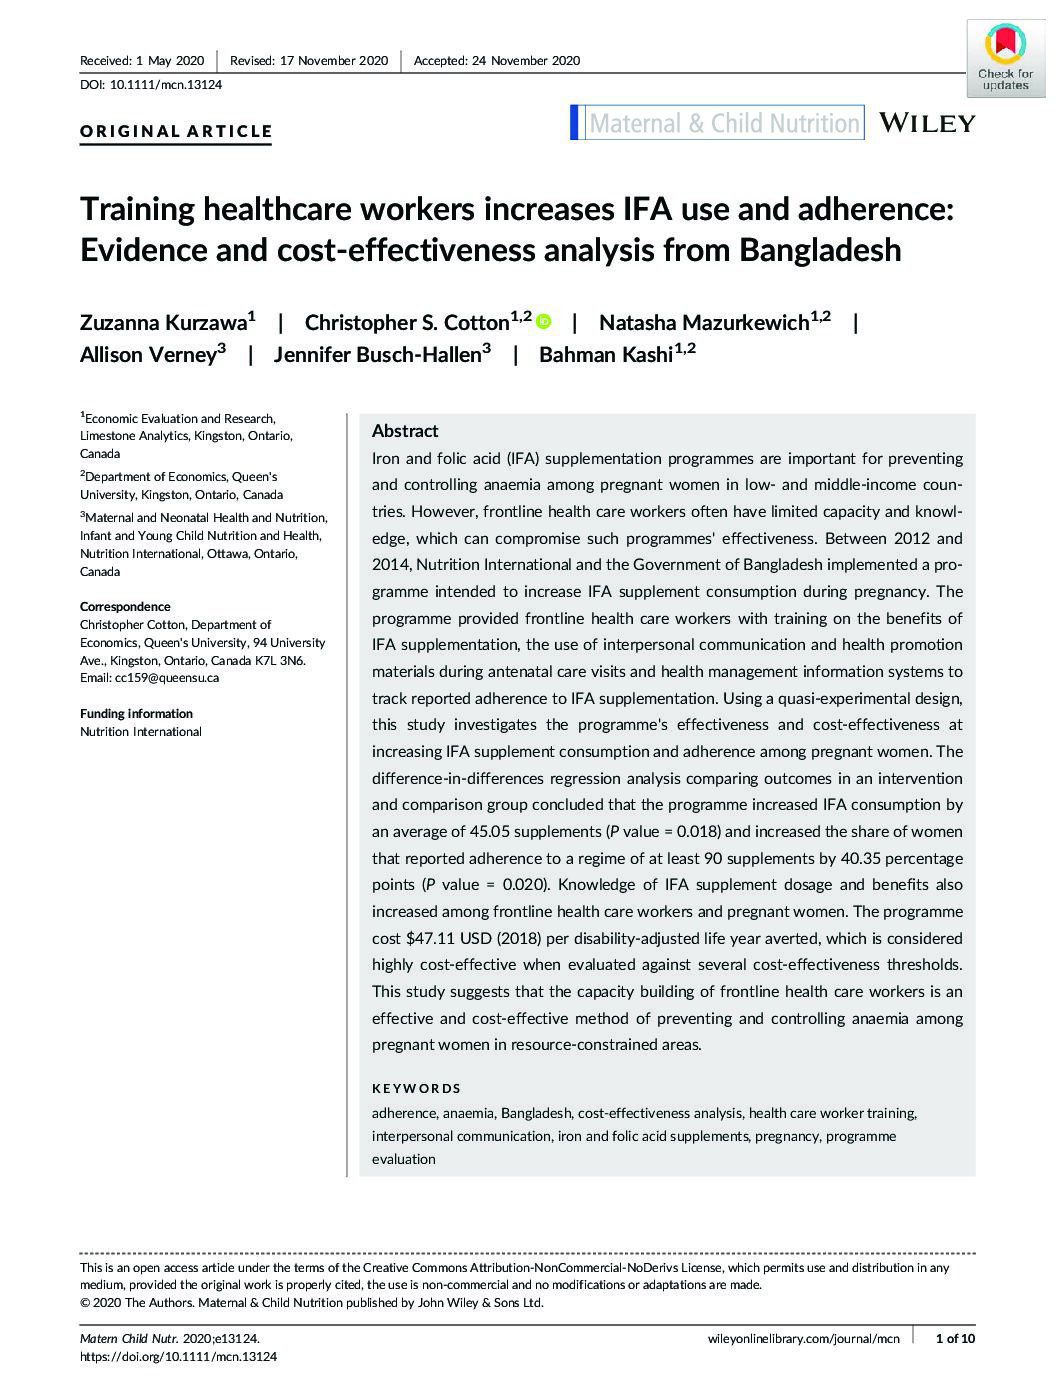 Training healthcare workers increases IFA use and adherence: Evidence and cost-effectiveness analysis from Bangladesh thumbnail